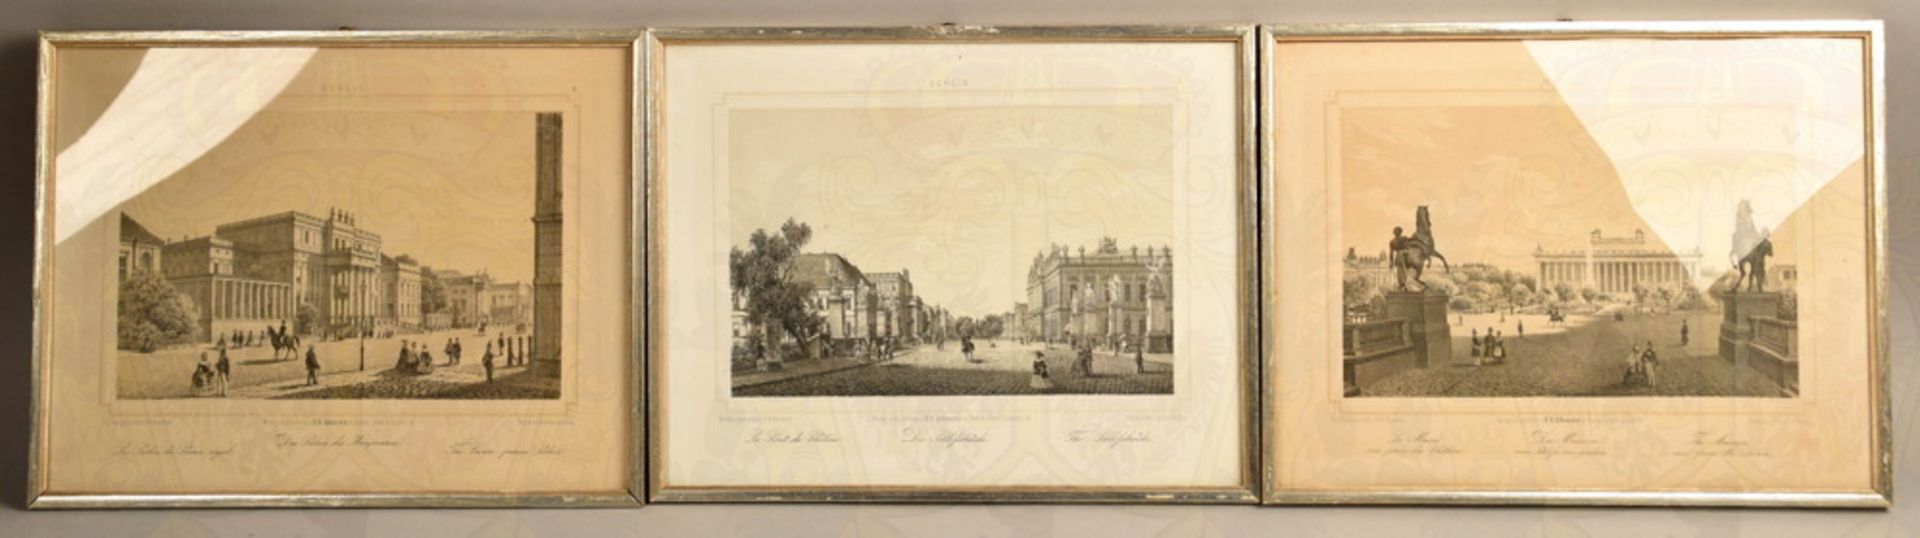 12 lithographies old Berlin views 1880-1900 - Image 2 of 2